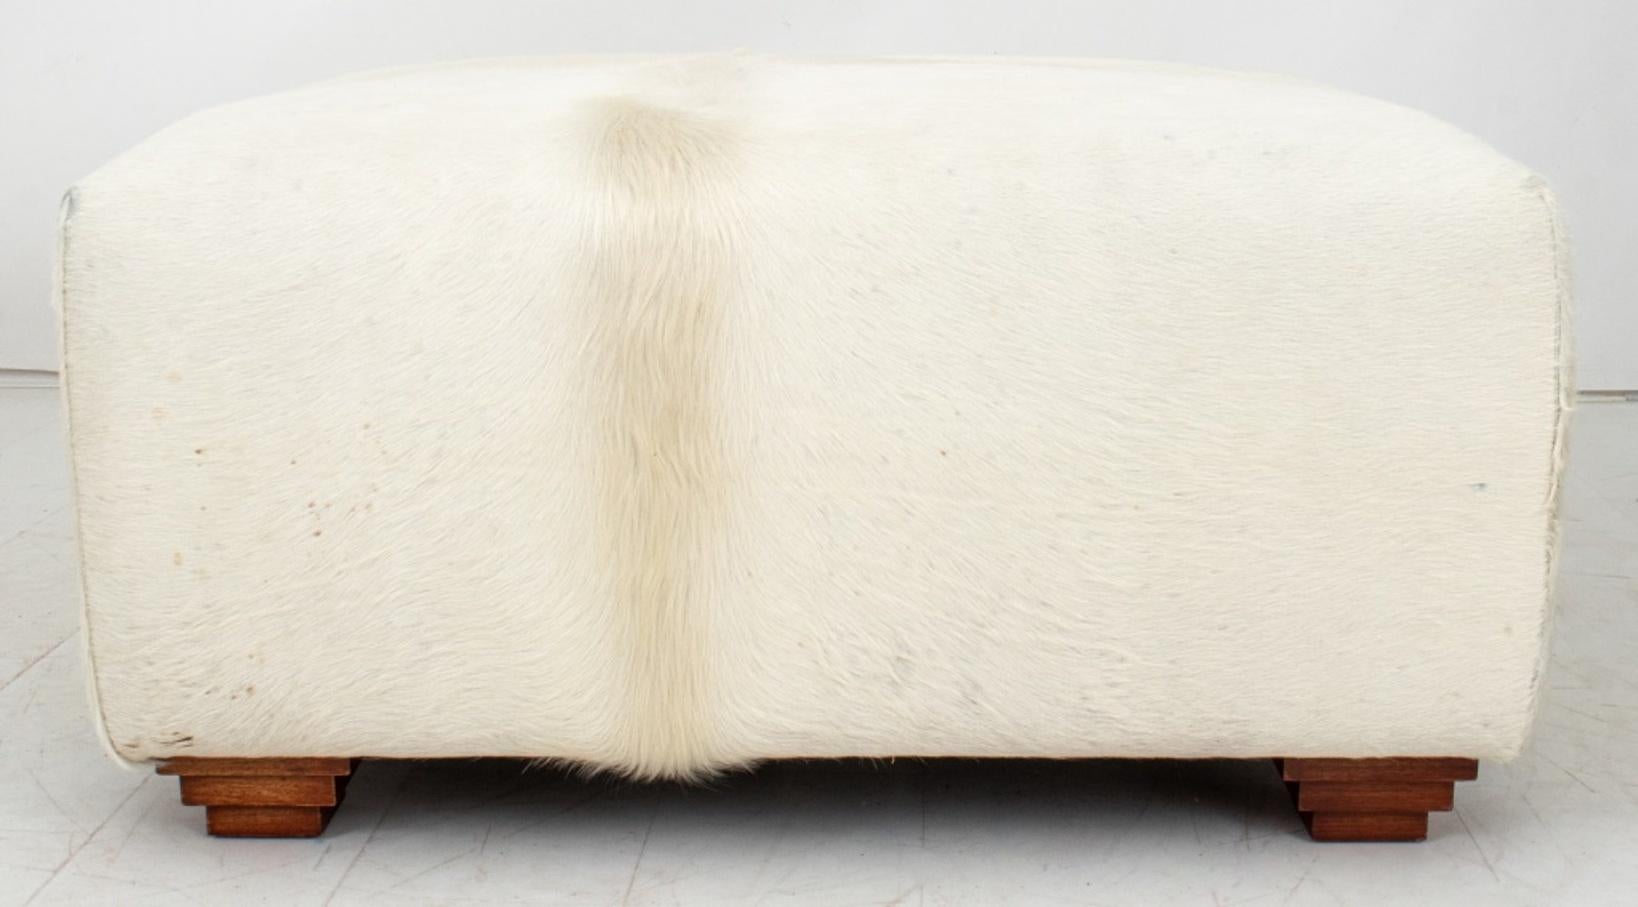 Cowhide Upholstered Storage Pouf or Ottoman fully upholstered in hide above ziggurat stacked feet, the hinged pouf opening to reveal storage.

Dimensions:   18